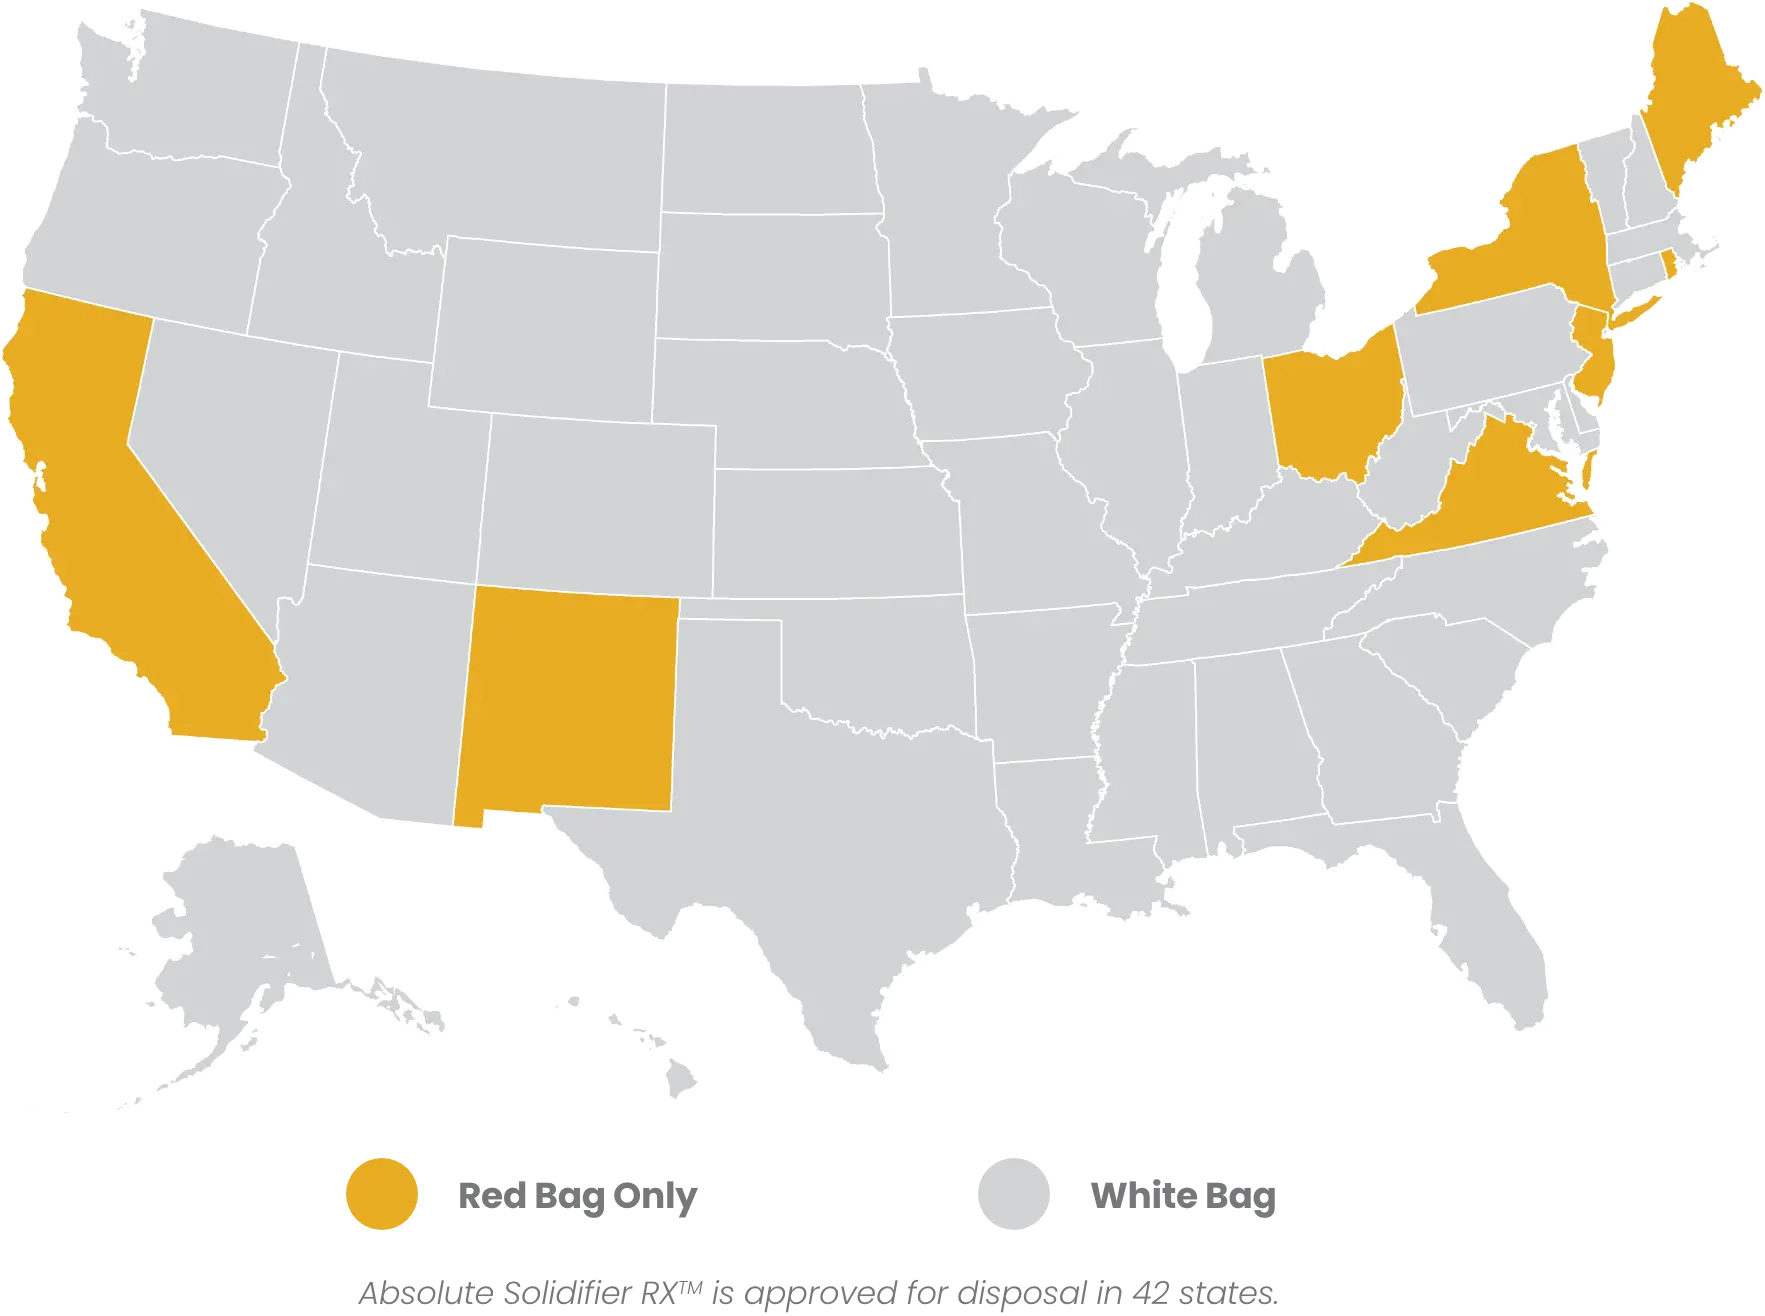 Absolute Solidifier RX is approved for white bag disposal in 42 states. The 8 red bag only states are California, Maine, New Mexico, New Jersey, New York, Ohio, Rhode Island, and Virginia.